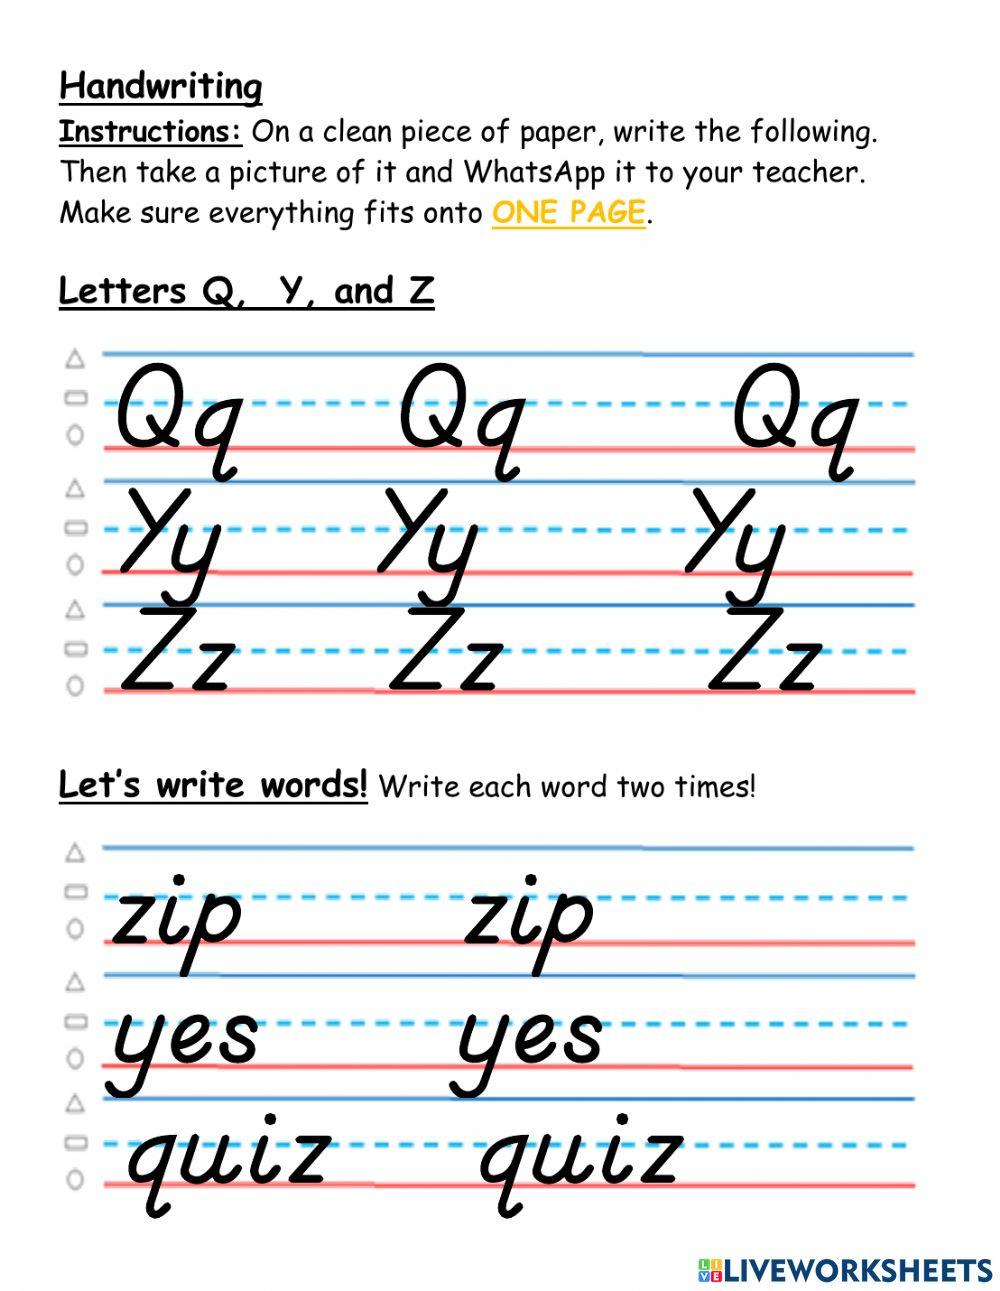 Handwriting Q, Y, and Z